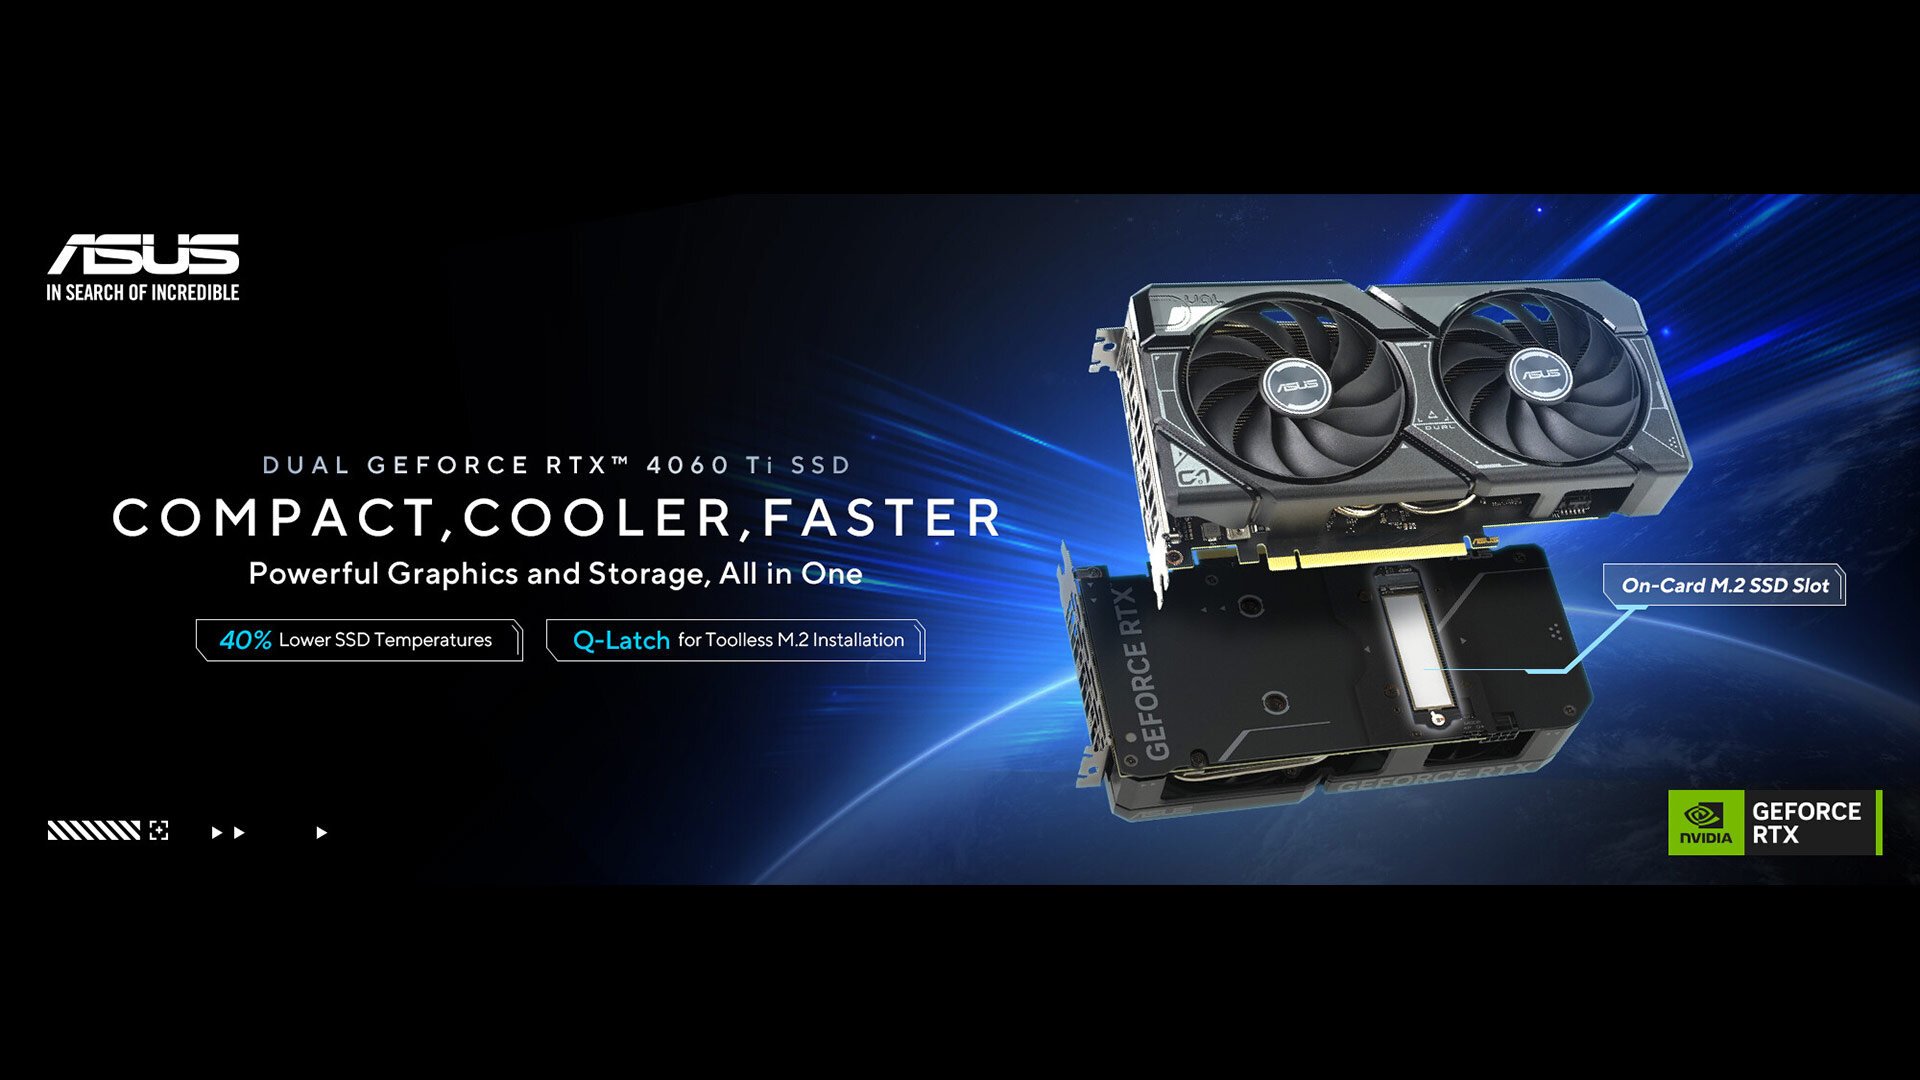 ASUS announces the Dual GeForce RTX 4060 Ti SSD graphics card – Asus